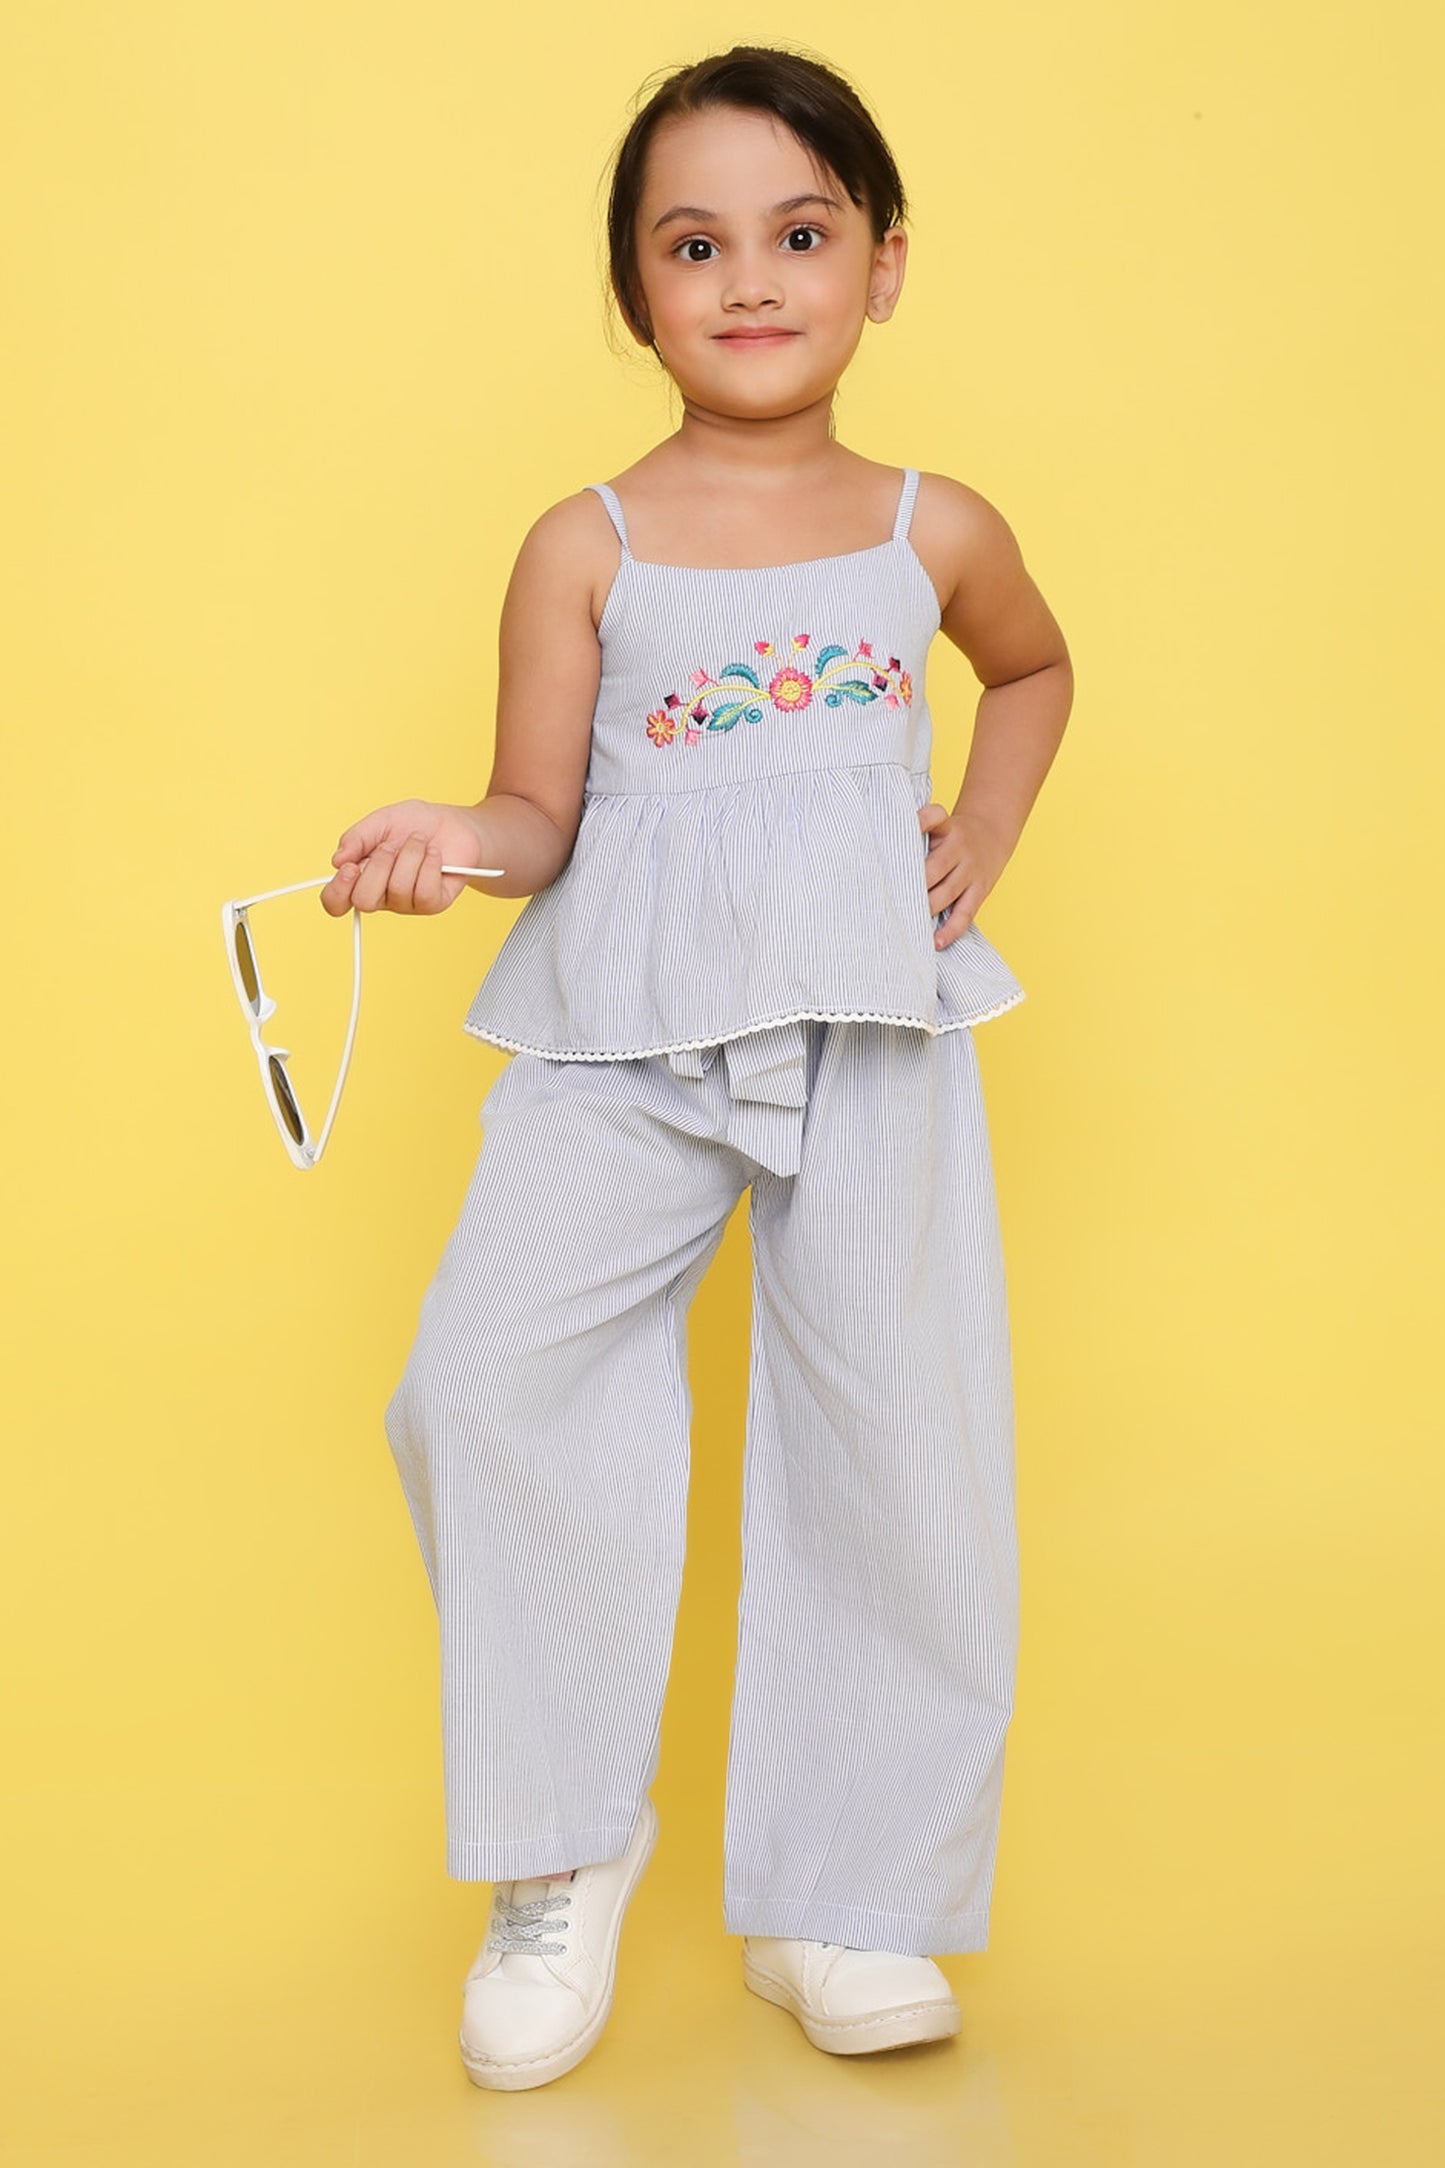 Knitting Doodles Premium Cotton Girls' Stripes Coordset with paper bag pants and crop top with Smart Floral embroidery on yolk- Blue and white